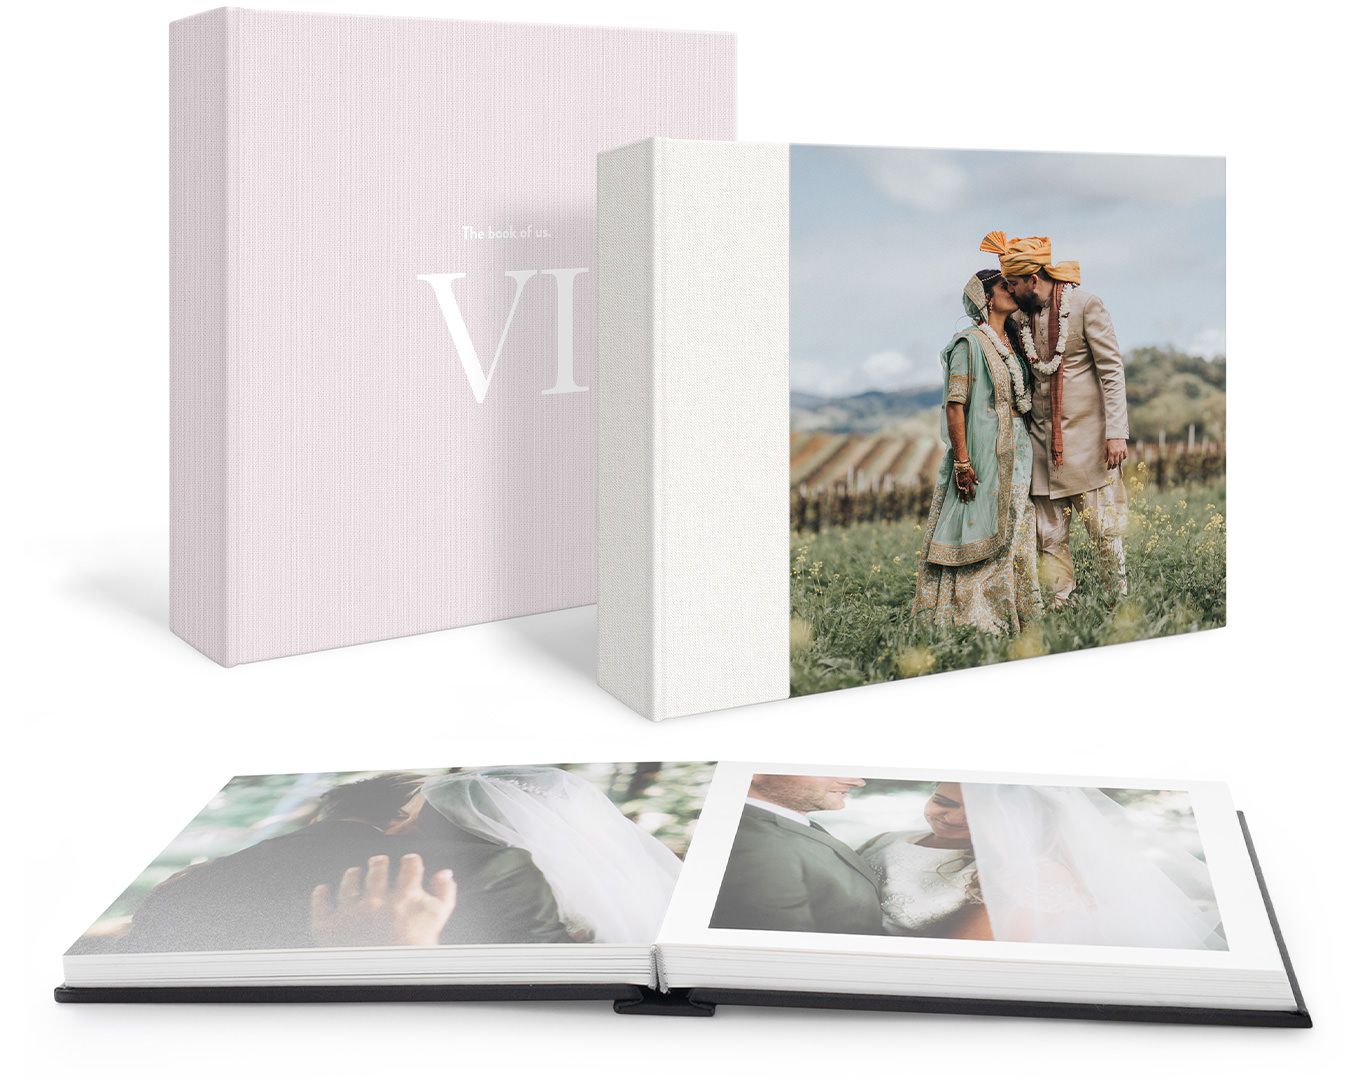 Two standing premium photo albums; text only on one cover, and a couple on their wedding on the other. And an open photo album in the foreground with portrait images of a couple on their wedding day.